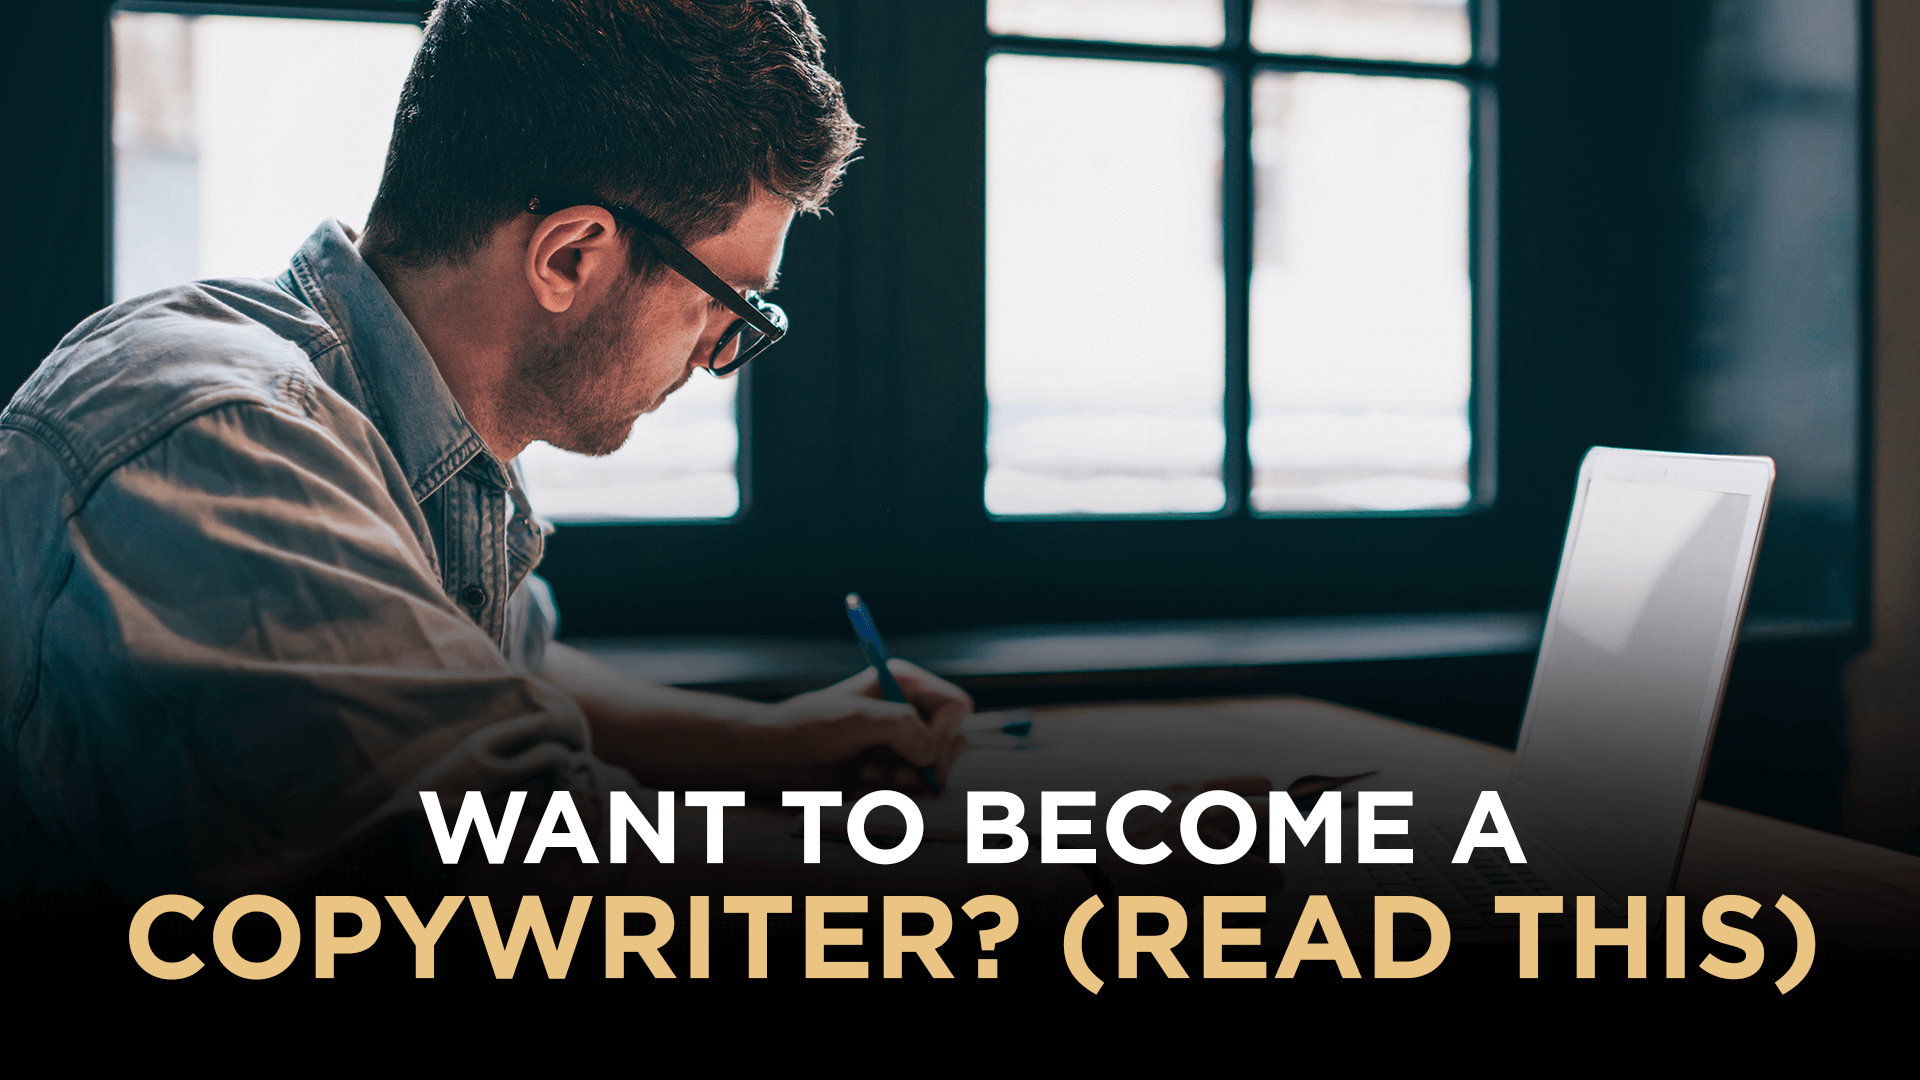 Want to become a copywriter